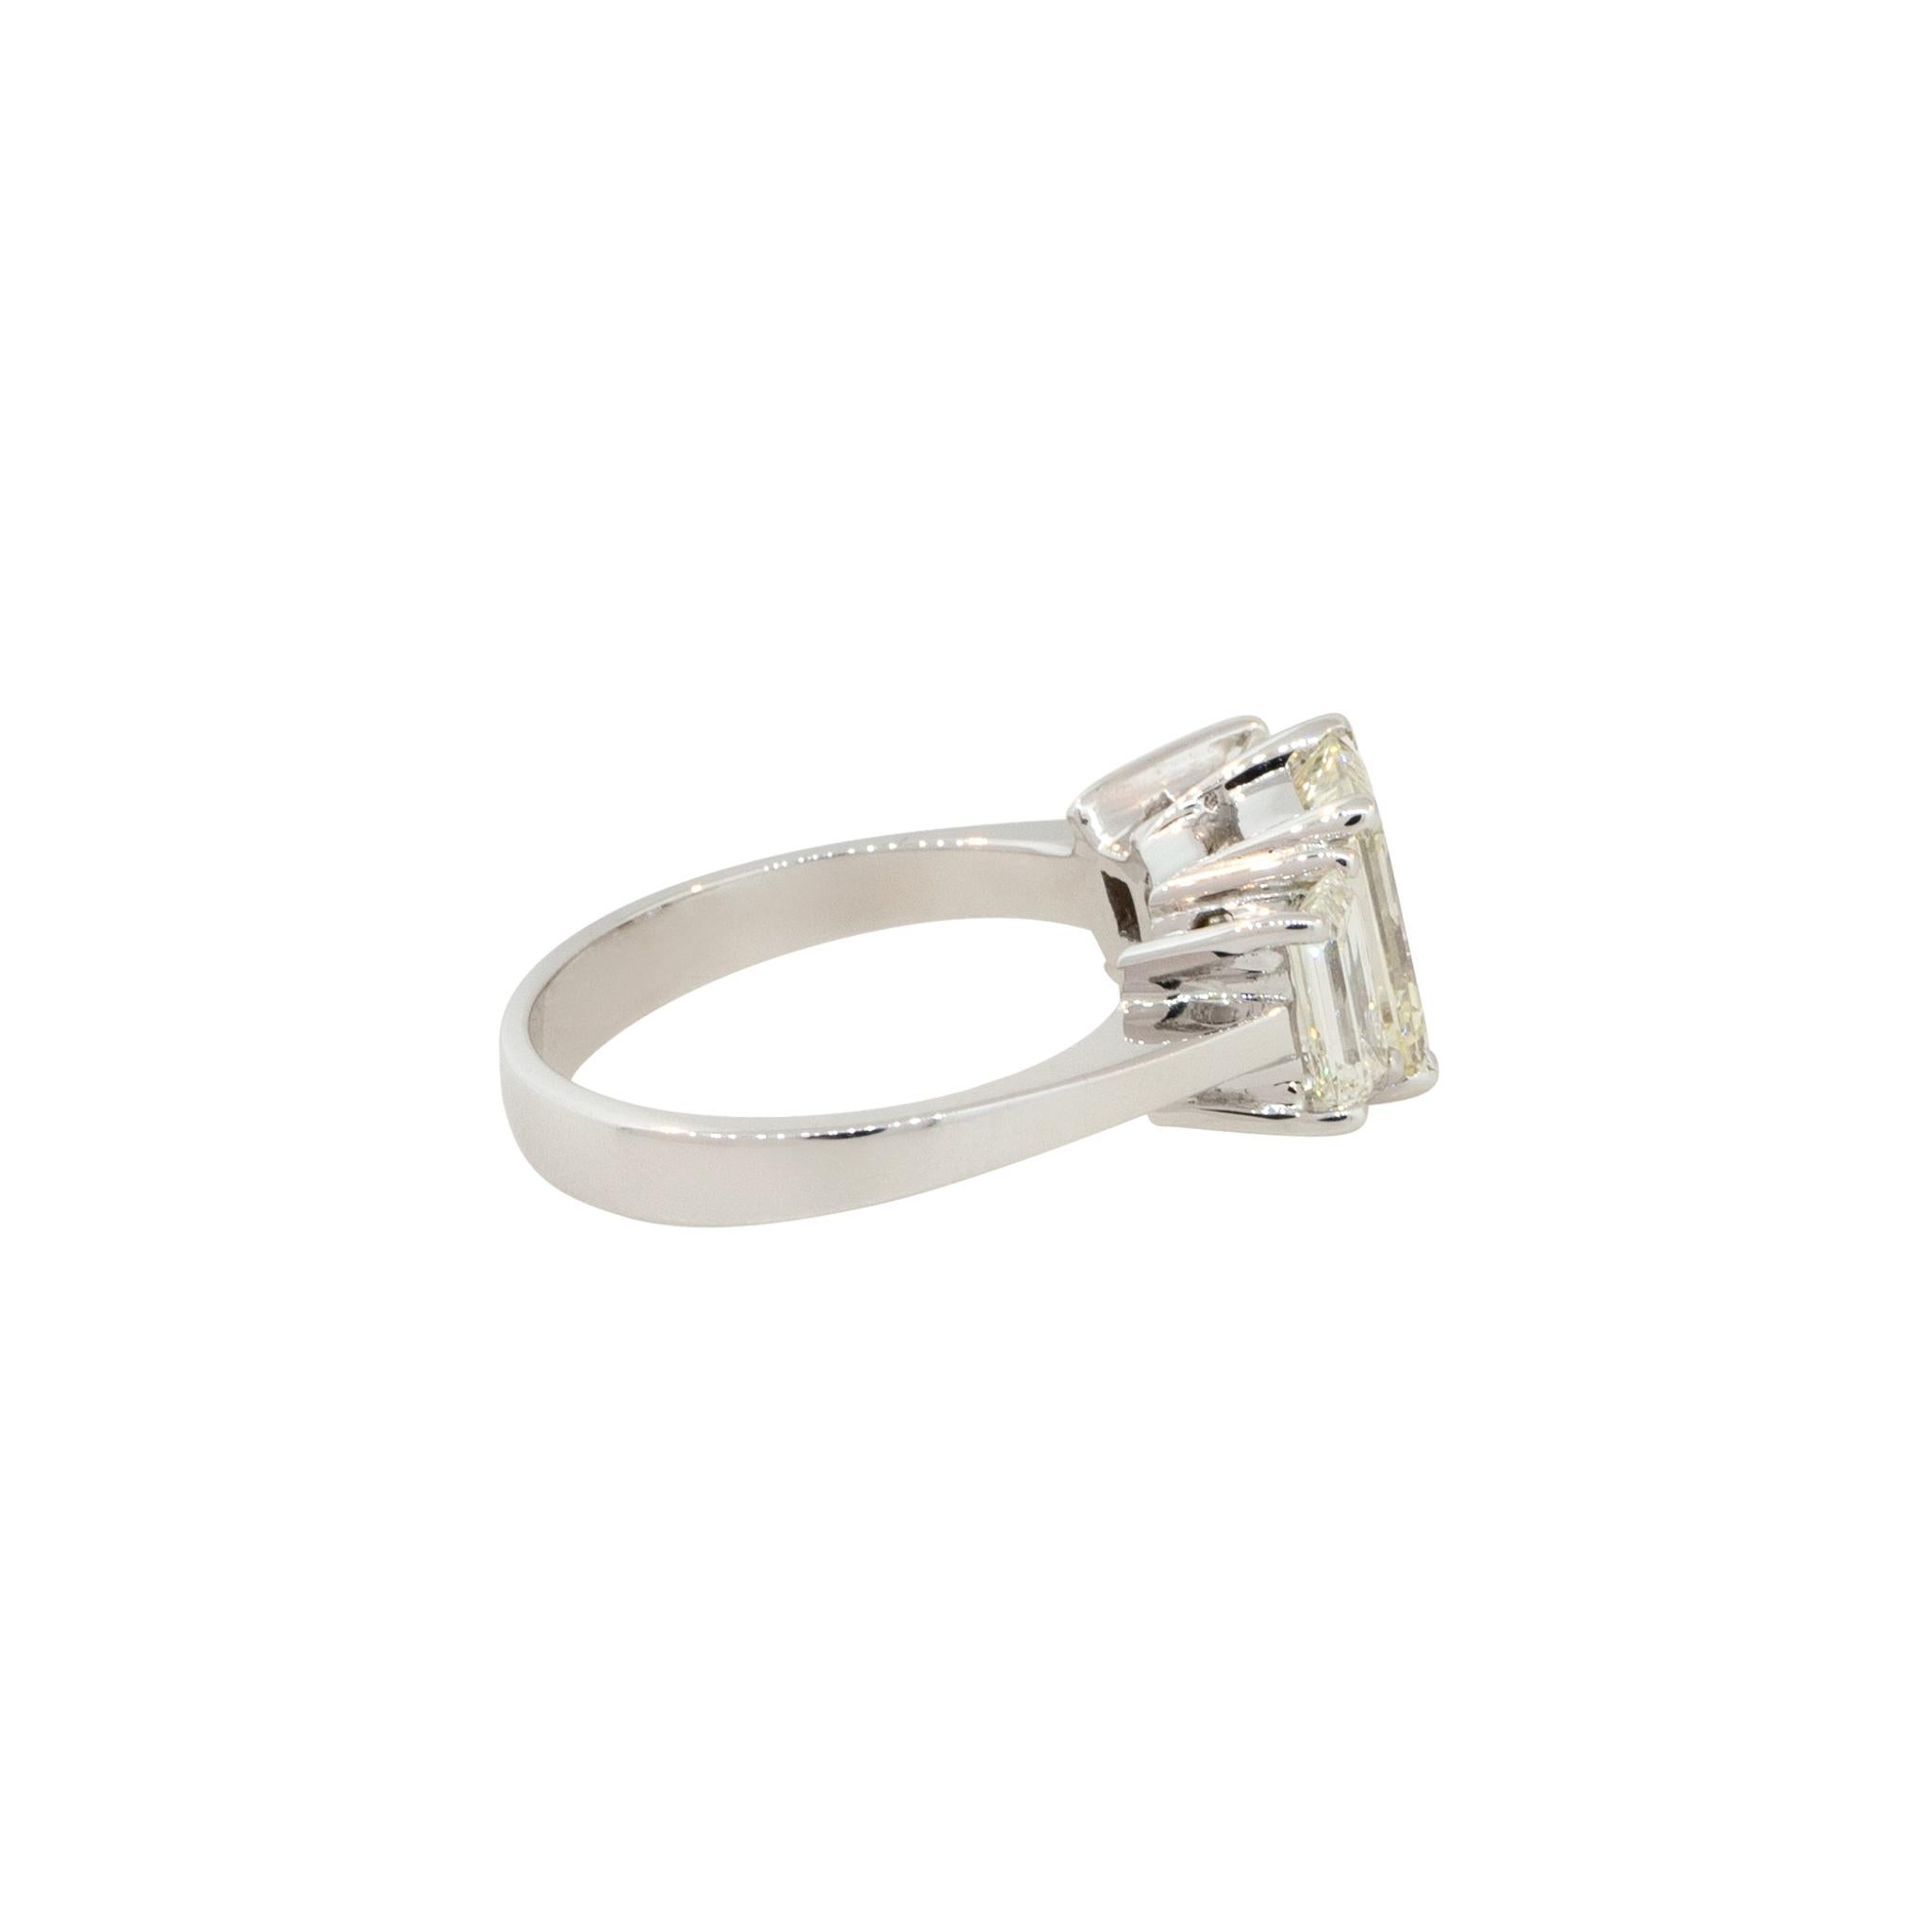 3.21 Carat 3 Stone Emerald Cut Diamond Engagement Ring 18 Karat In Stock In Excellent Condition For Sale In Boca Raton, FL